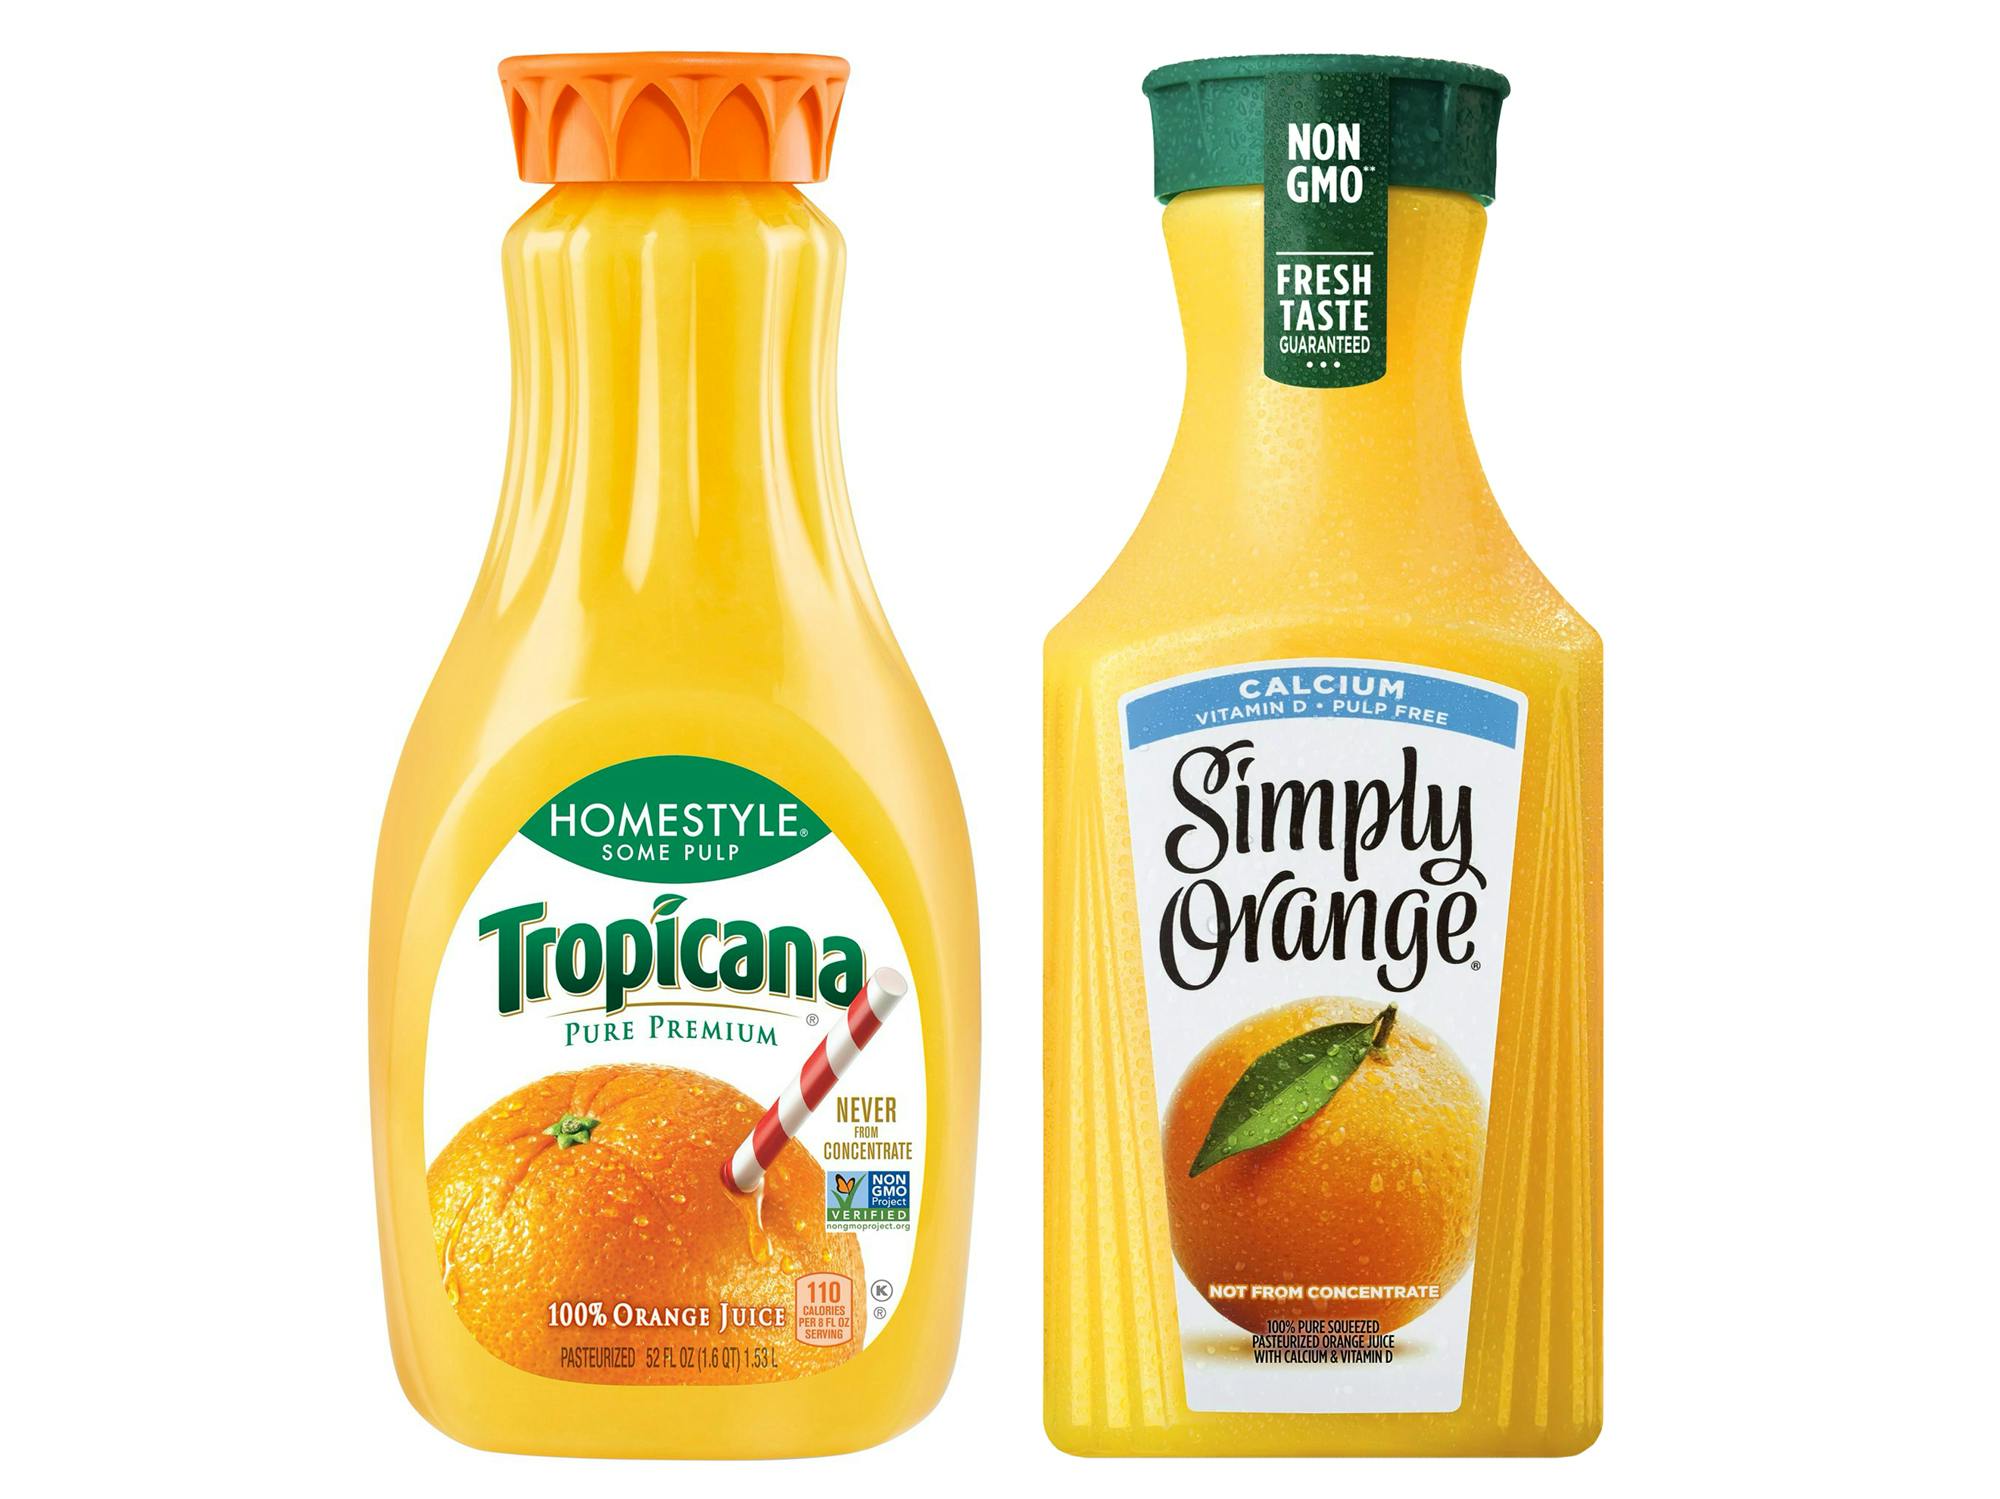 bottles of tropicana homestyle and simply orange juice with calcium